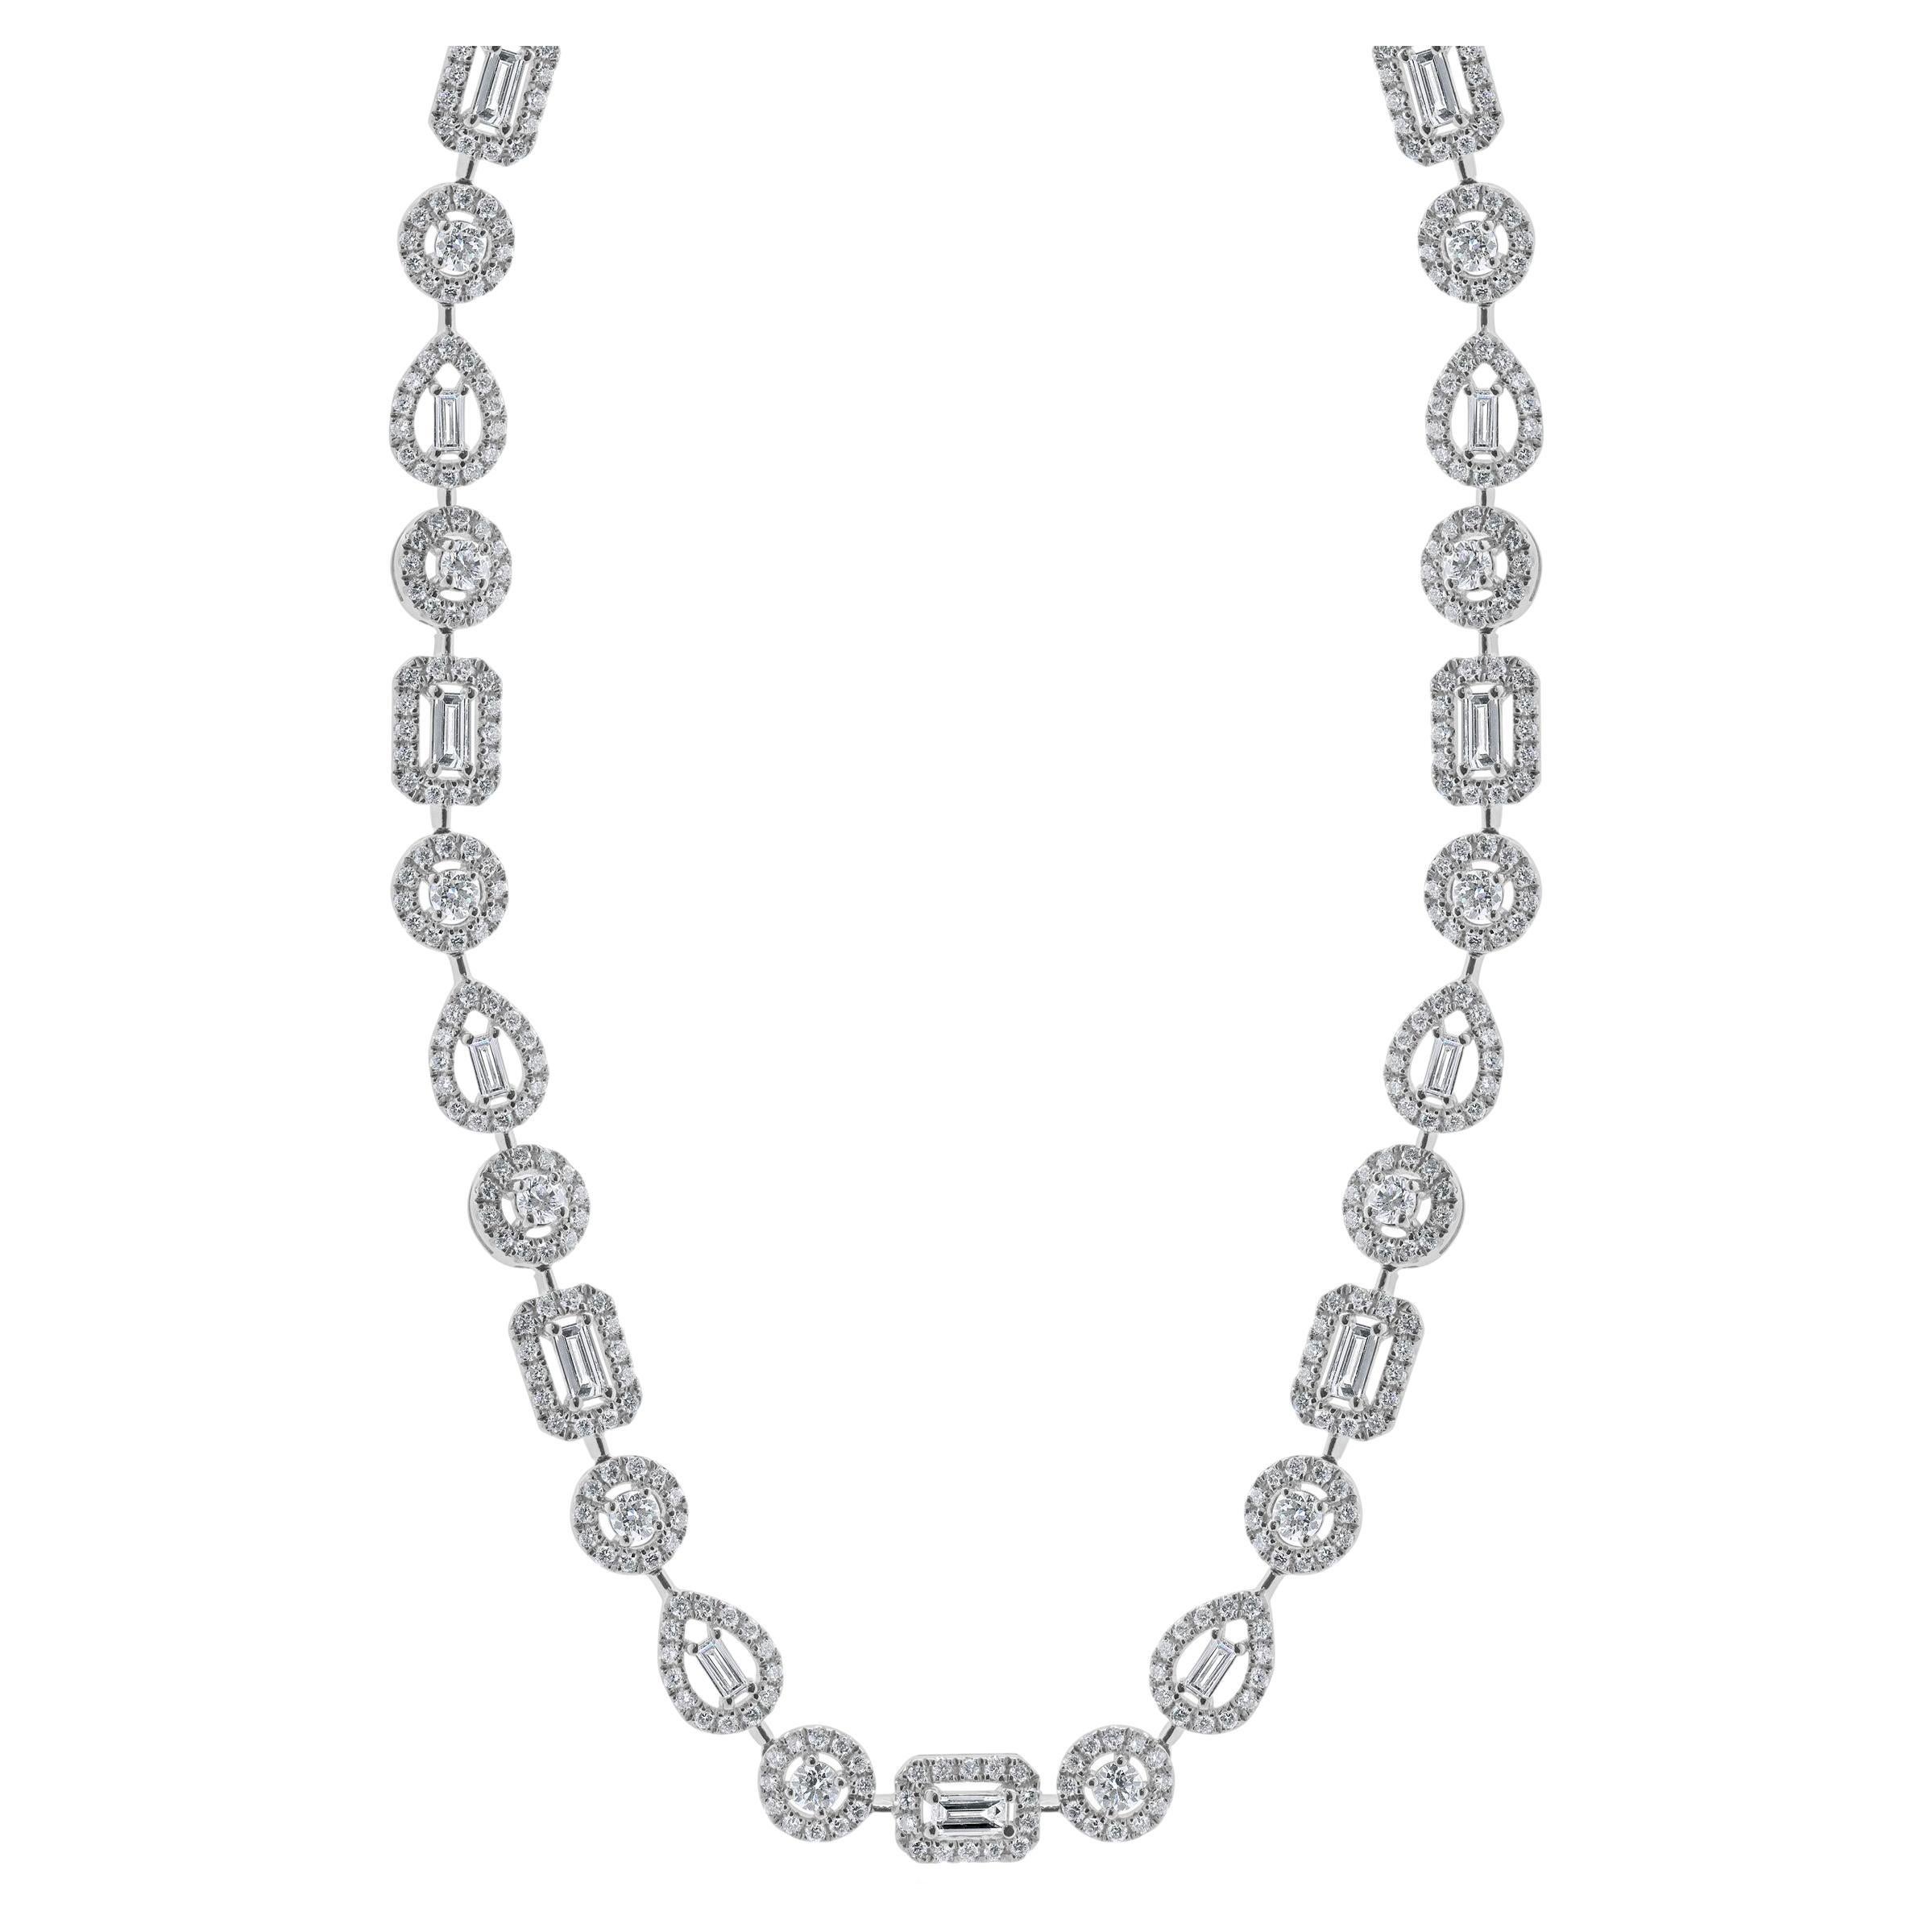 Material good | Simple bridal necklace, Diamond jewelry necklace, White  gold necklace diamond